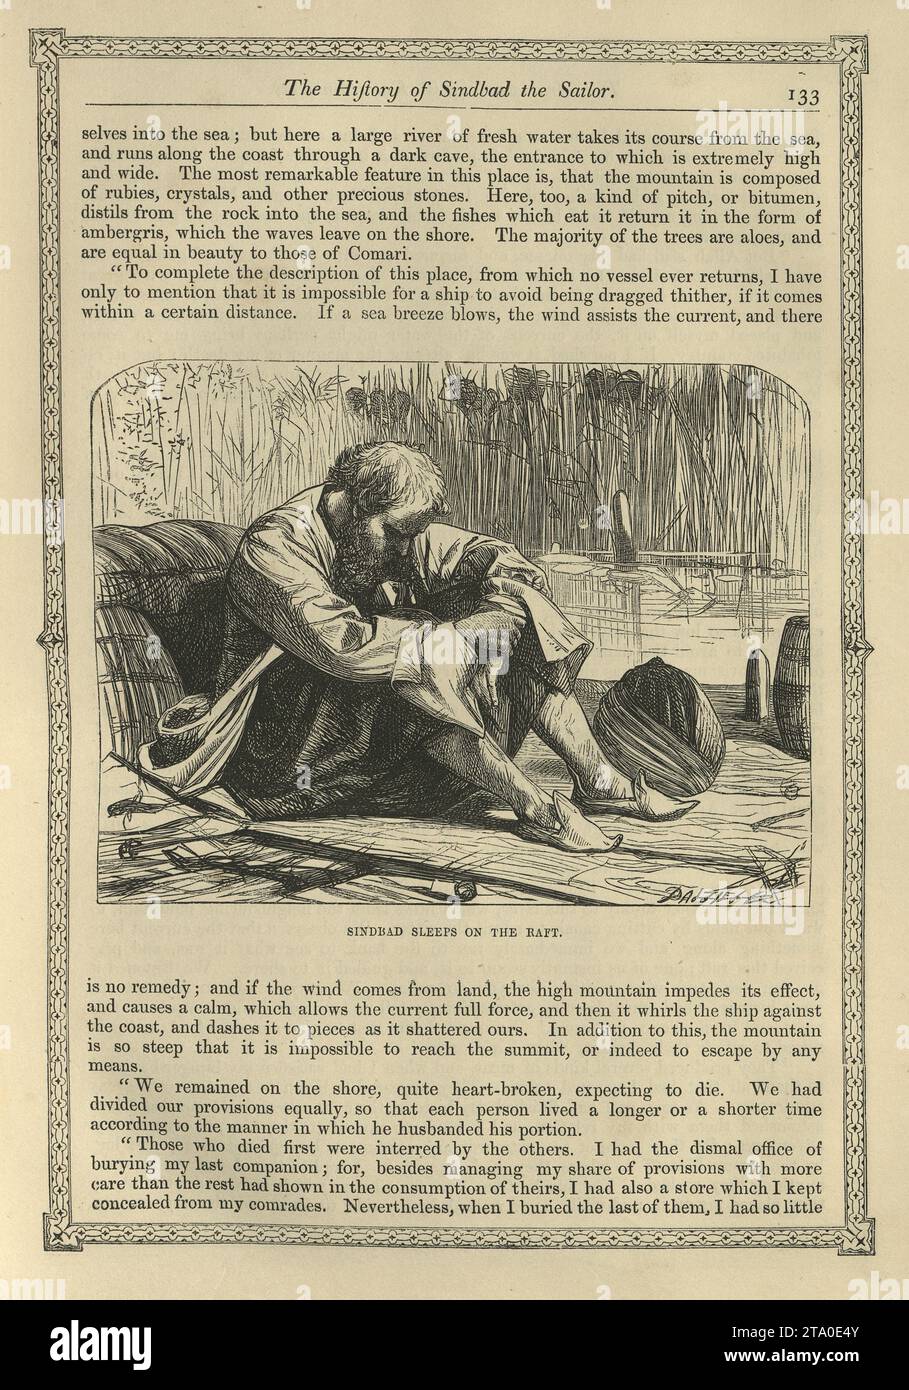 Vintage illustration One Thousand and One Nights, Sinbad the Sailor sleeps on the raft, Arabian, Middle Eastern folktales, by The Brothers Dalziel. Stock Photo